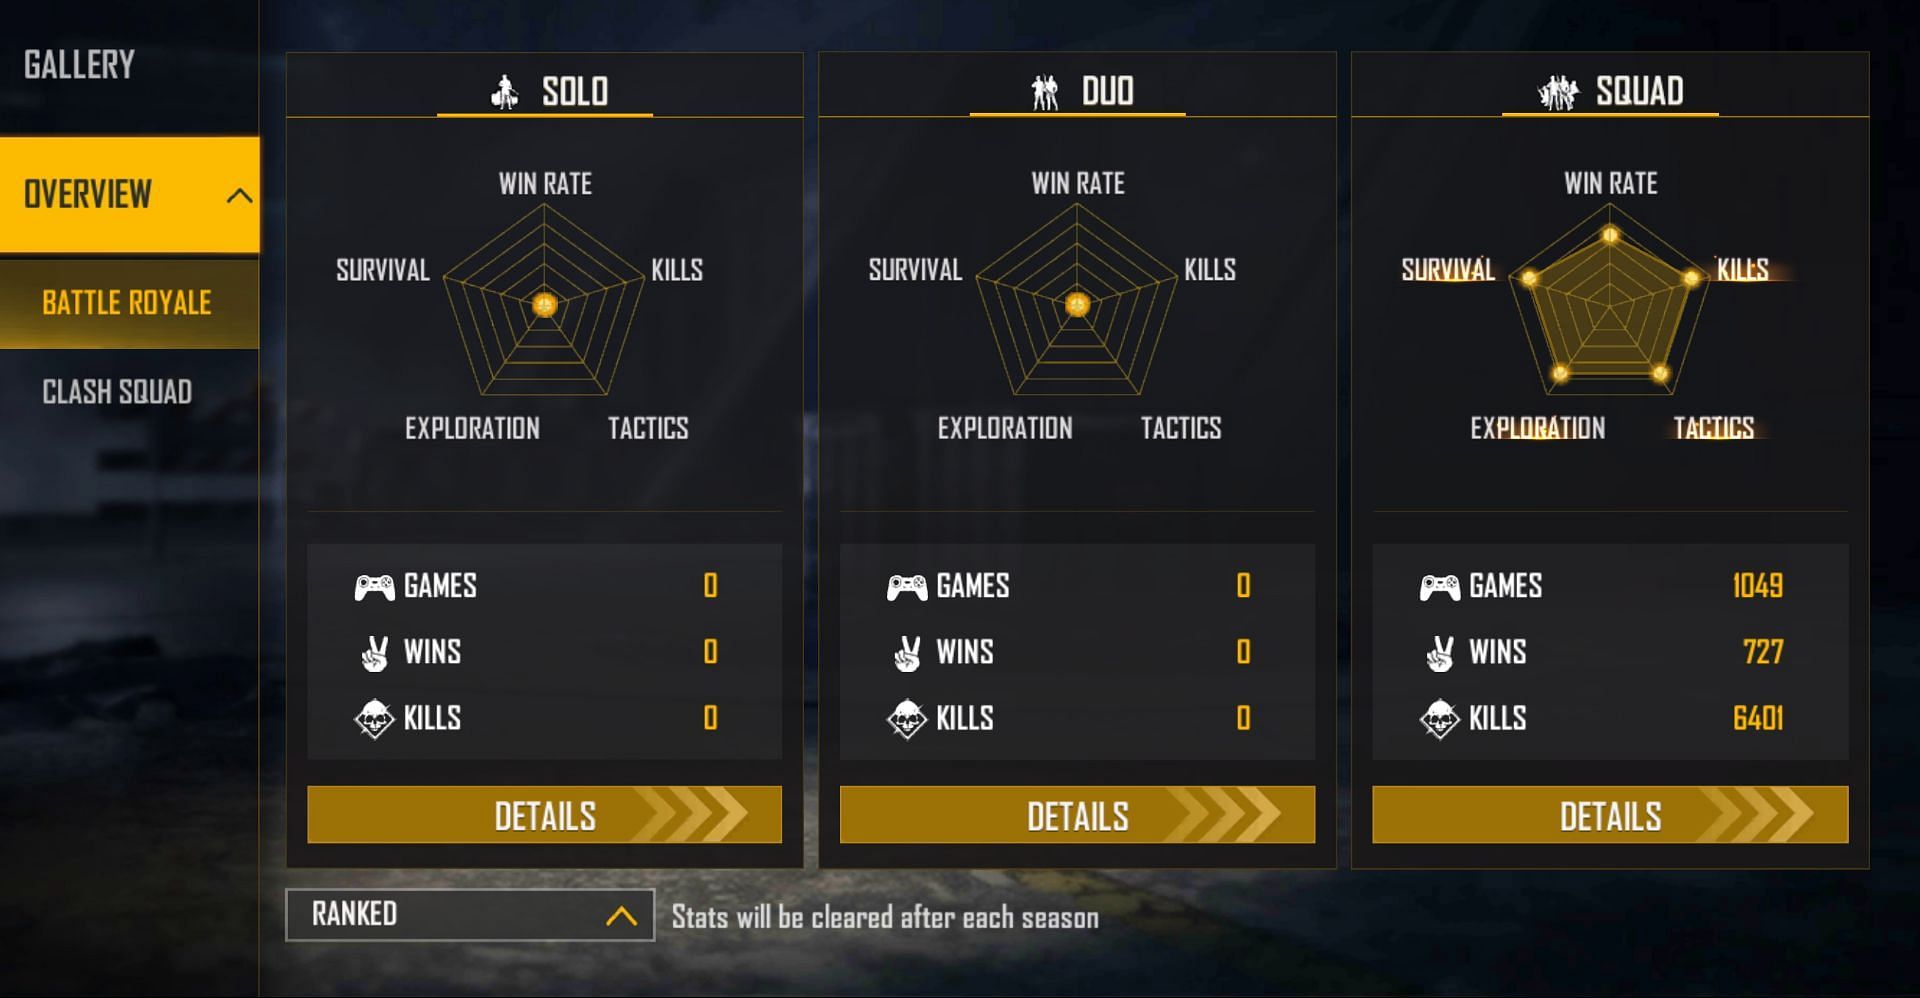 Action Bolt has played only squad games in this season (Image via Free Fire)